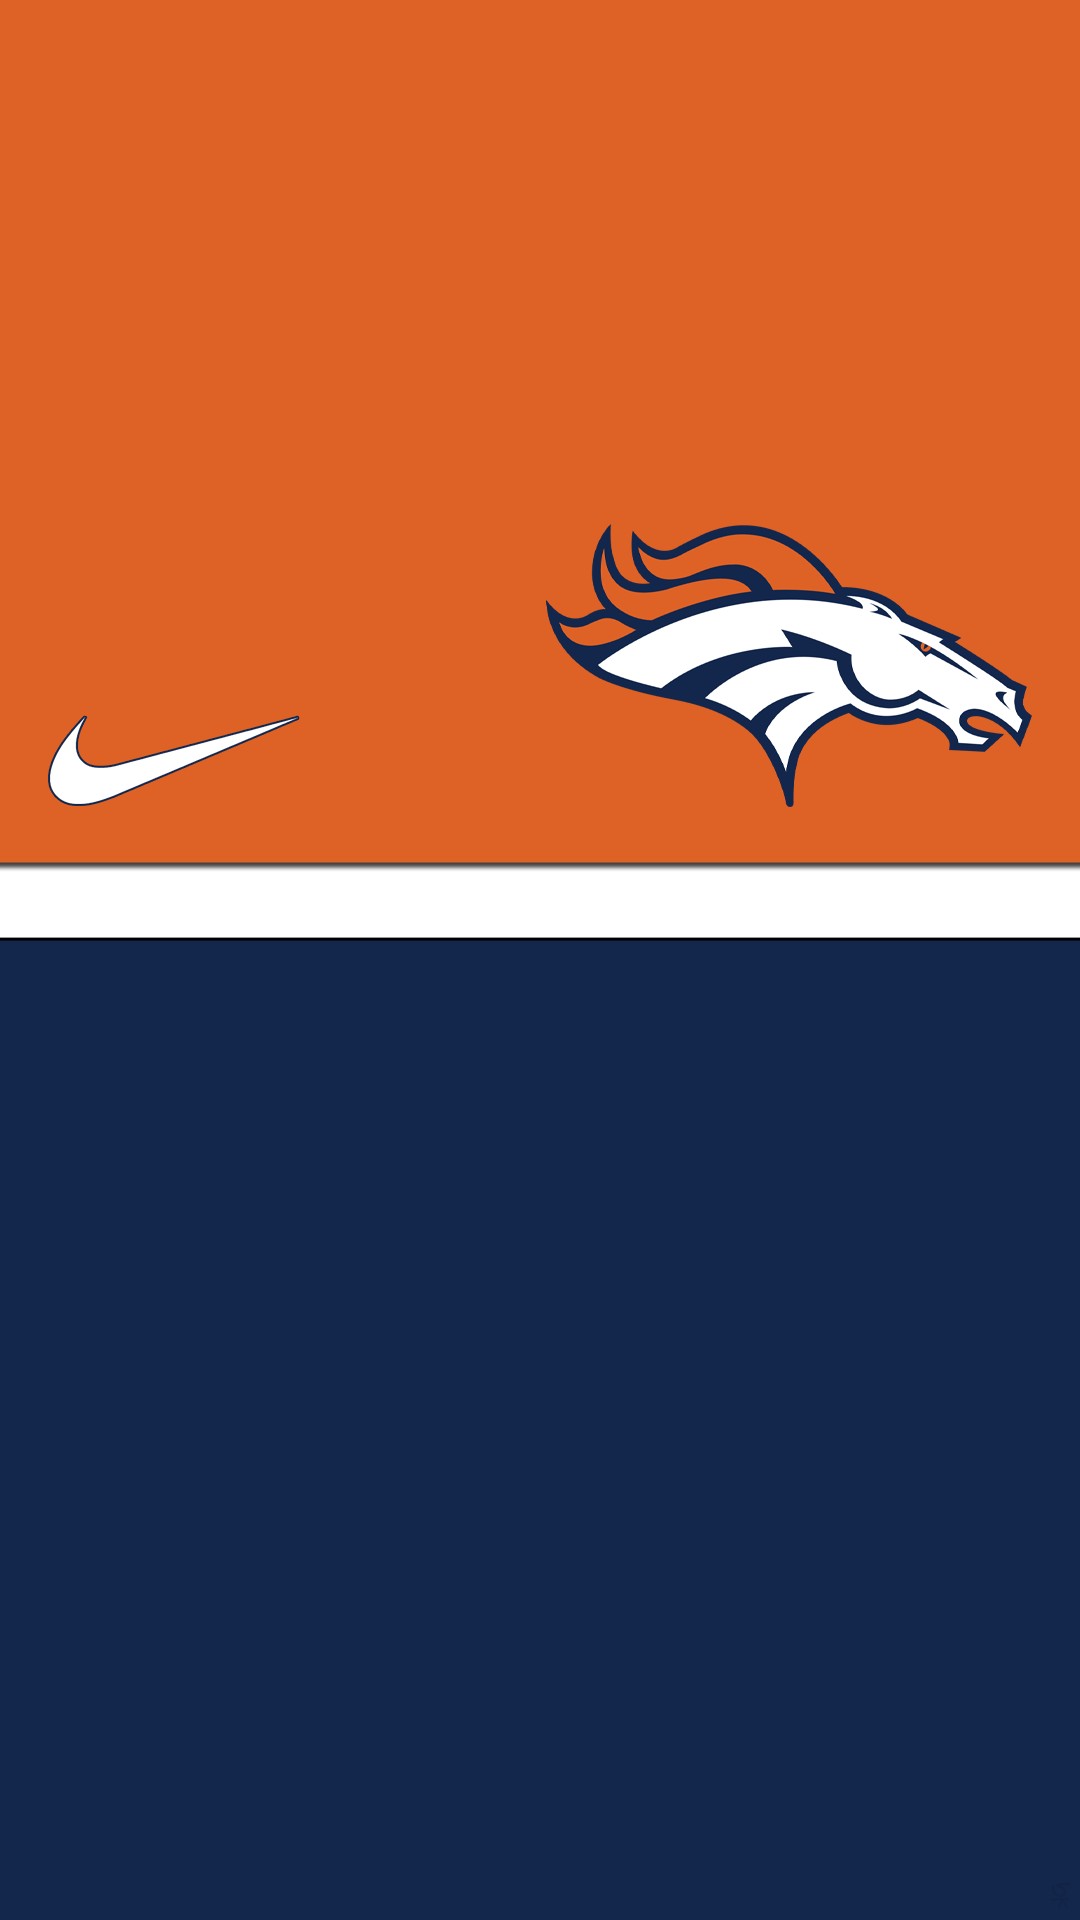 Denver Broncos iPhone Wallpaper HD with high-resolution 1080x1920 pixel. Download and set as wallpaper for Apple iPhone X, XS Max, XR, 8, 7, 6, SE, iPad, Android